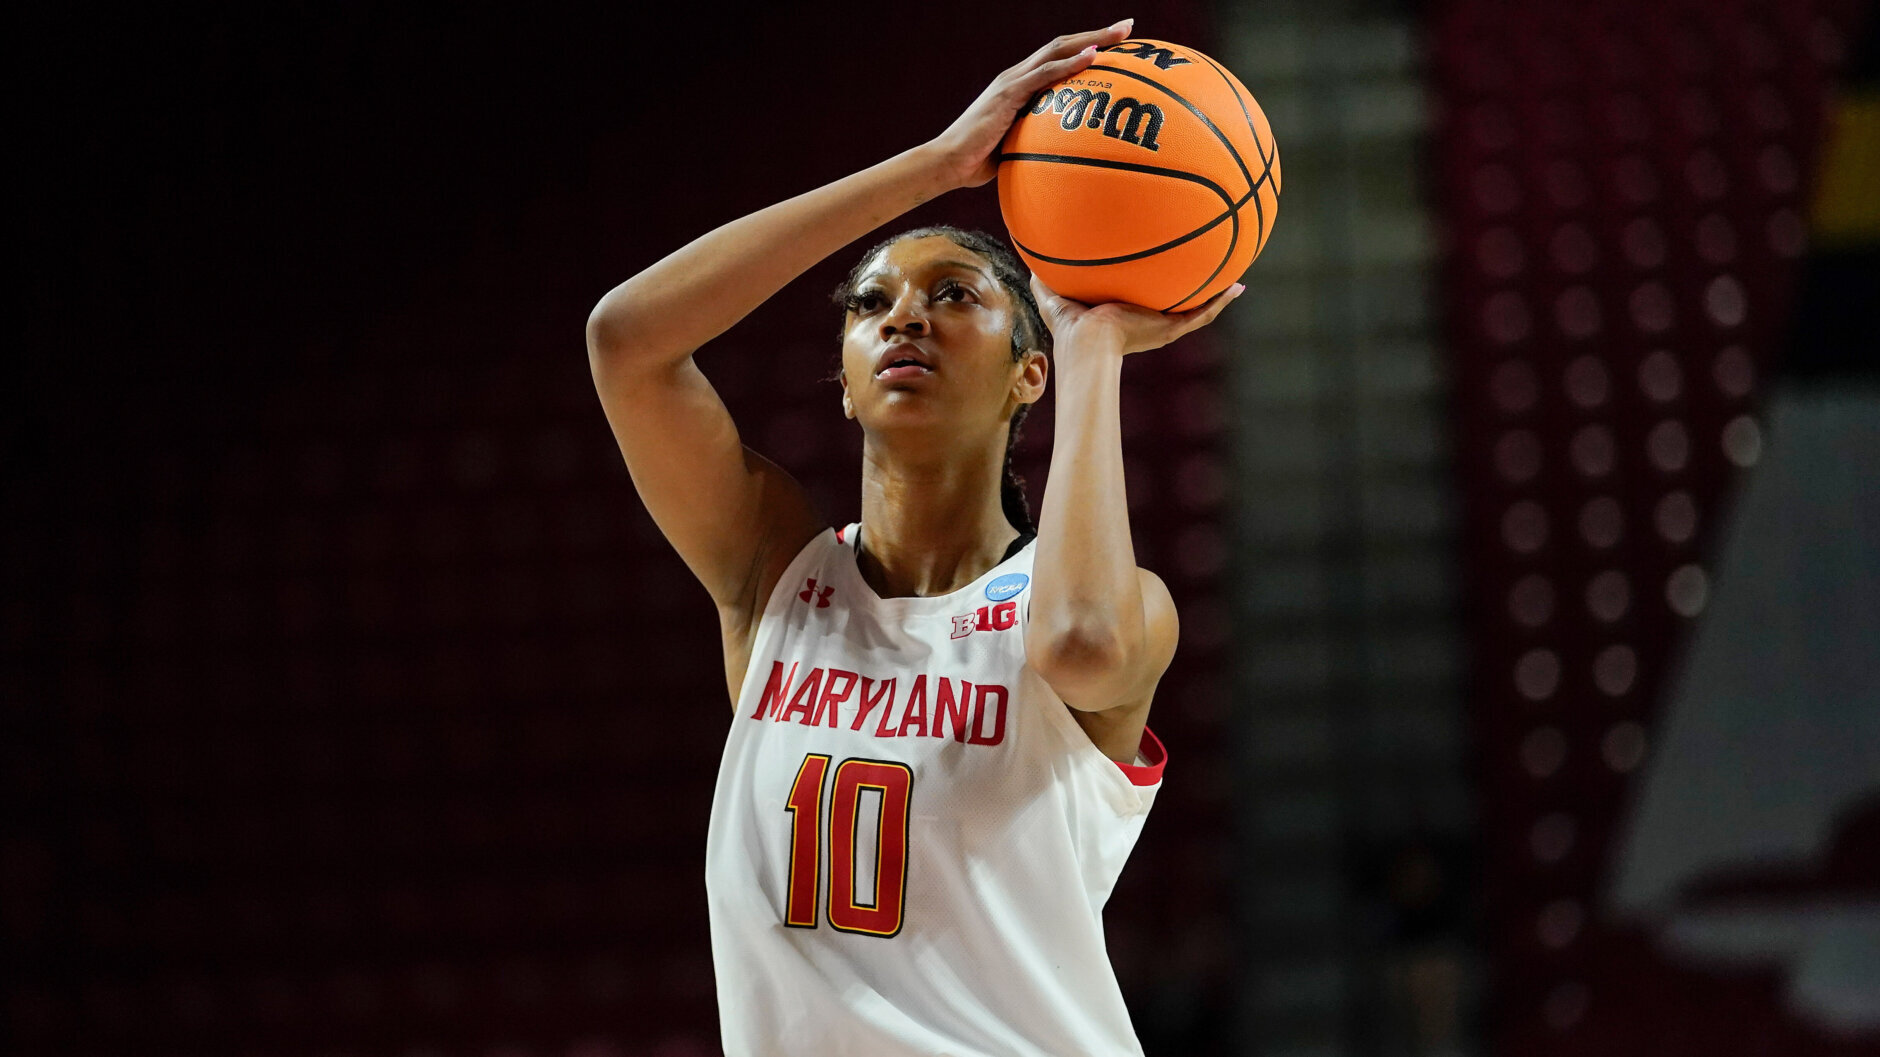 Maryland forward Angel Reese shoots against Delaware during the second half of a college basketball game in the first round of the NCAA tournament, Friday, March 18, 2022, in College Park, Md. Maryland won 102-71. (AP Photo/Julio Cortez)